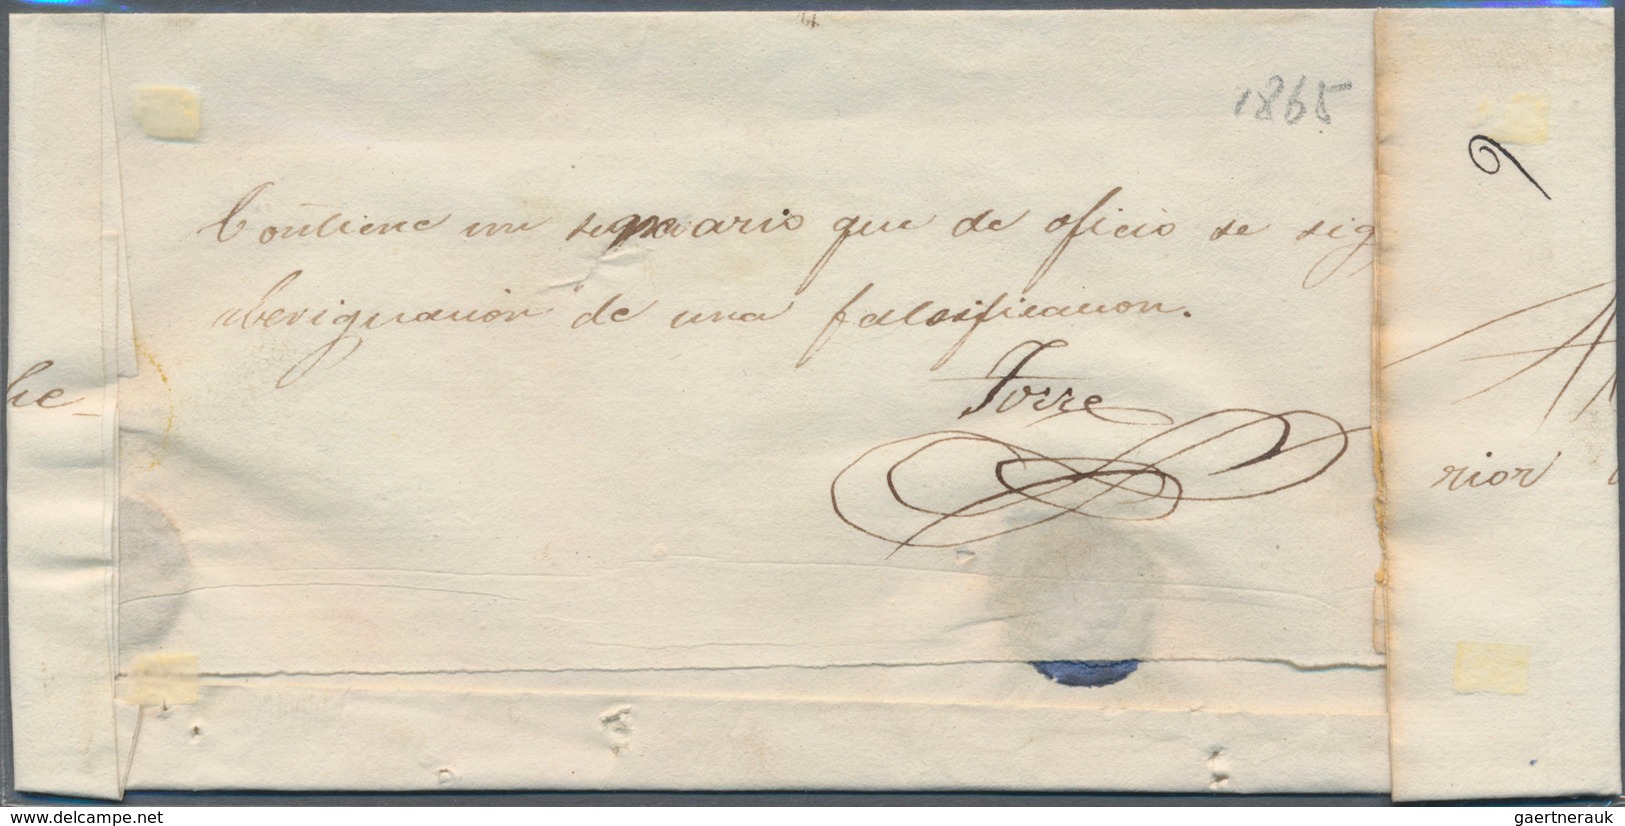 Ecuador: 1840's-50's ca.: Five covers from YBARRA to Quito with four different Ybarra handstamps in